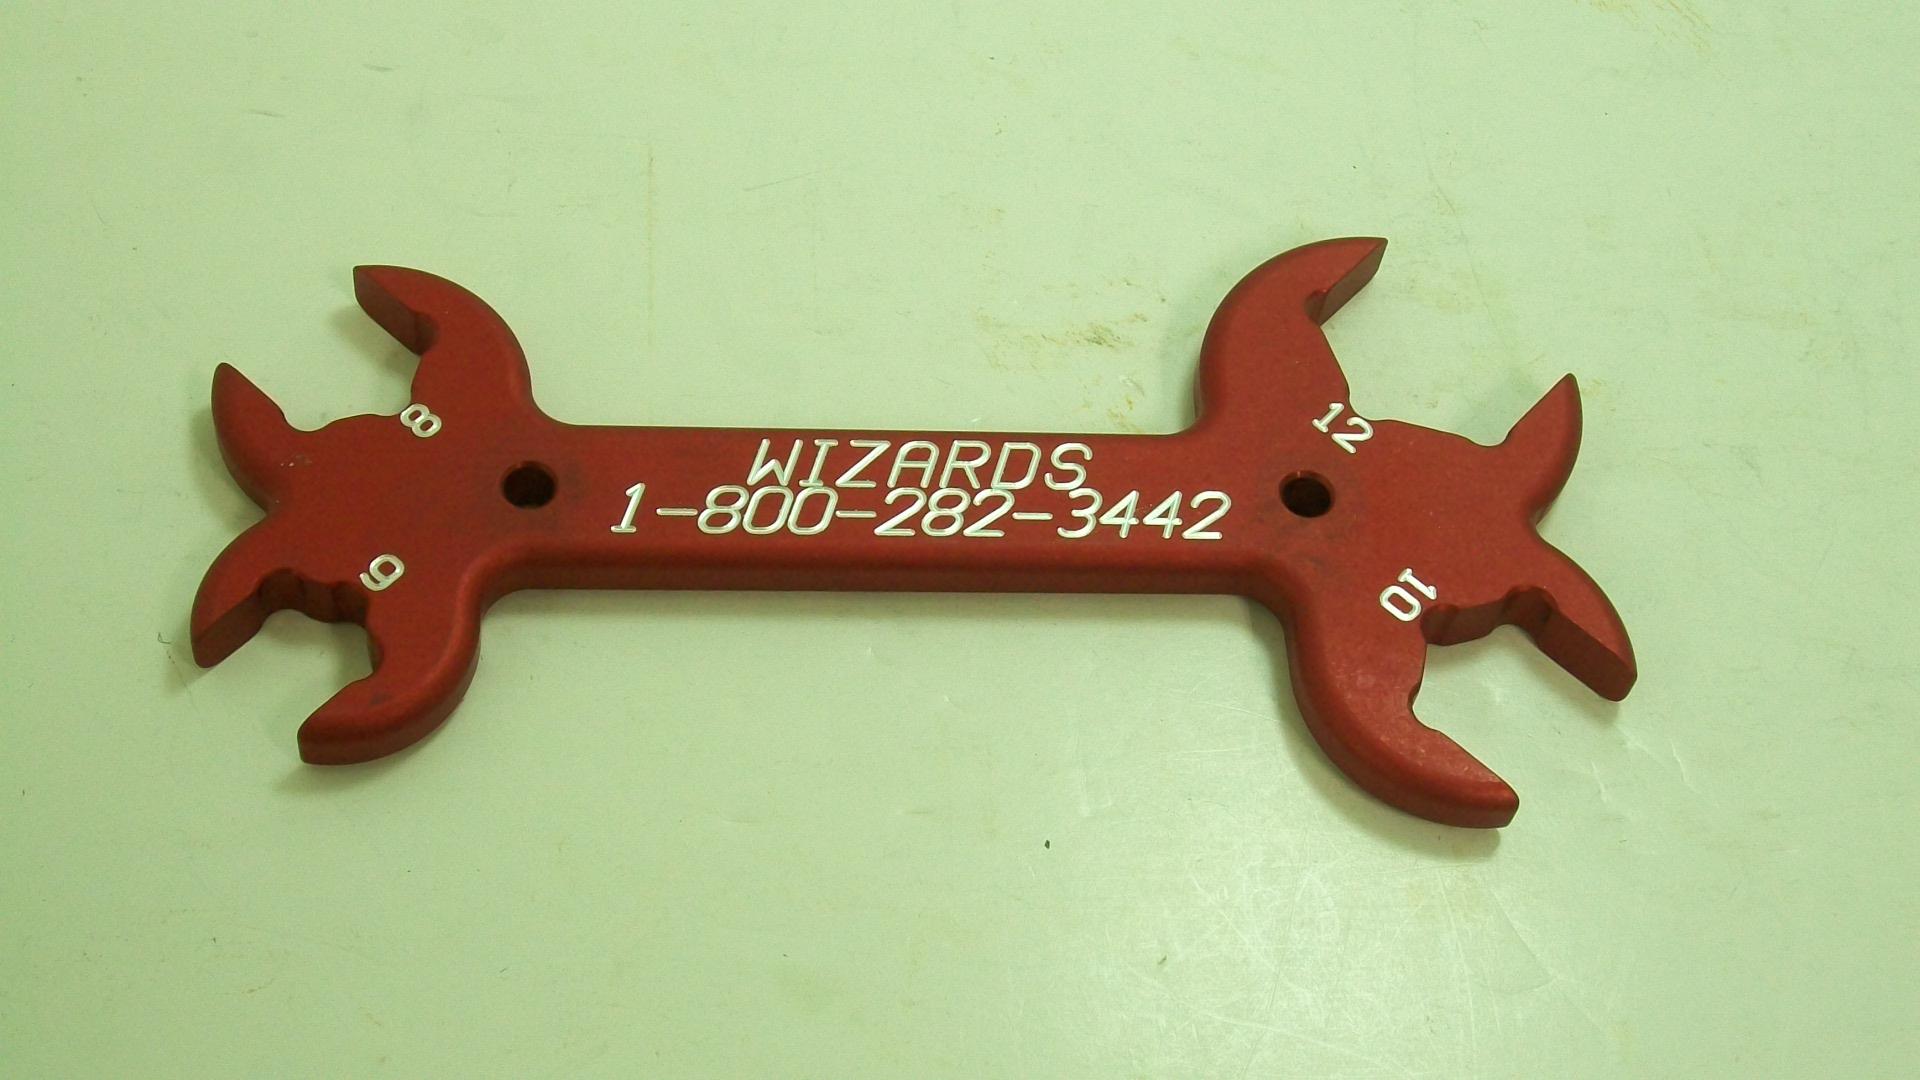 4 in 1 AN Wrench  Wizard's Warehouse